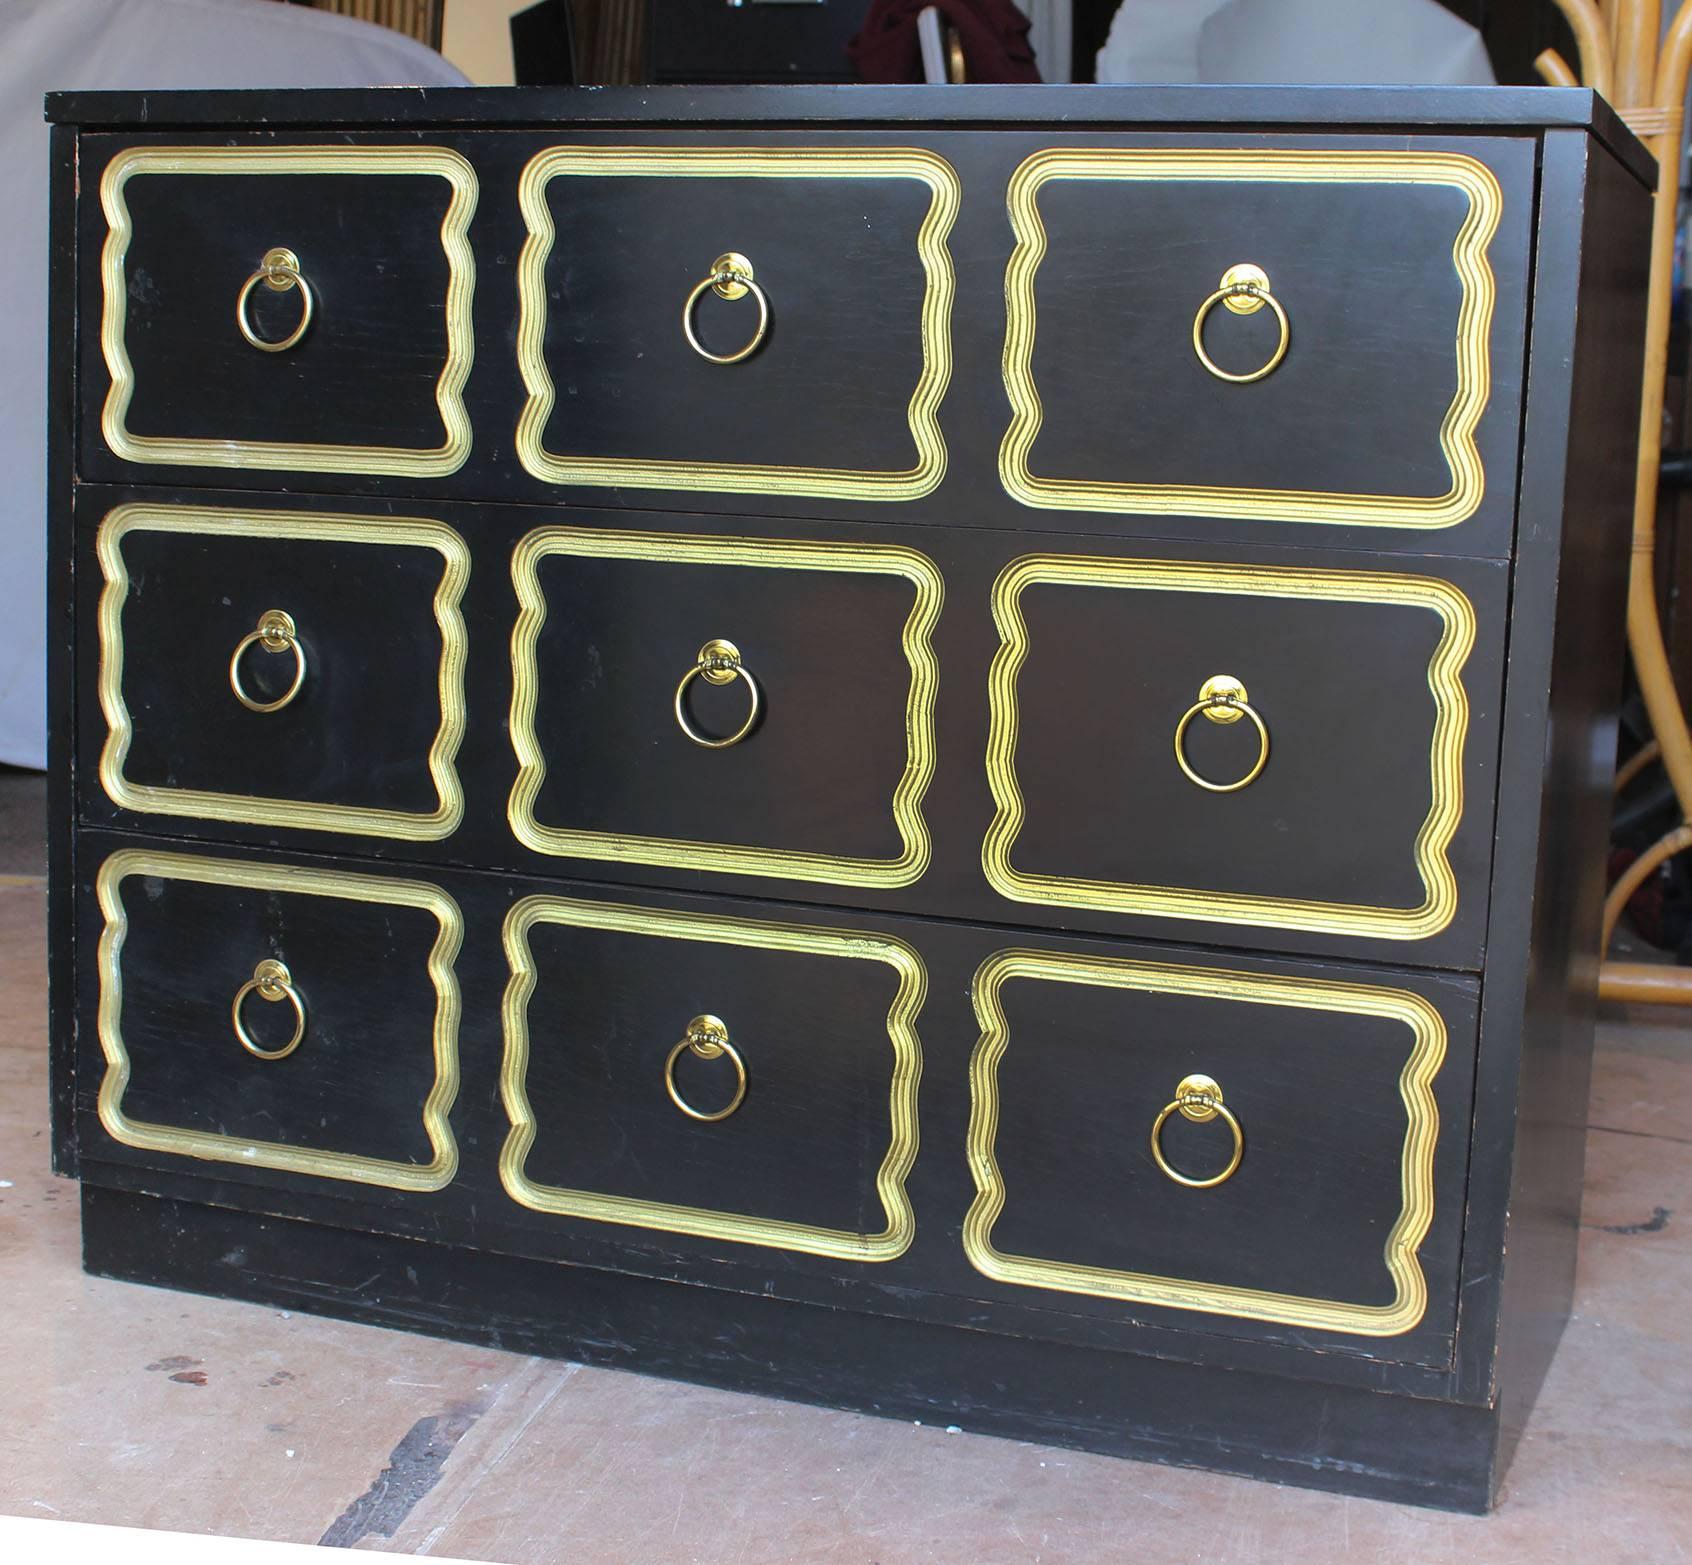 The classic Dorothy Draper Espana chest with brass pulls, in vintage original finish.

complementary shipping within 30 miles.